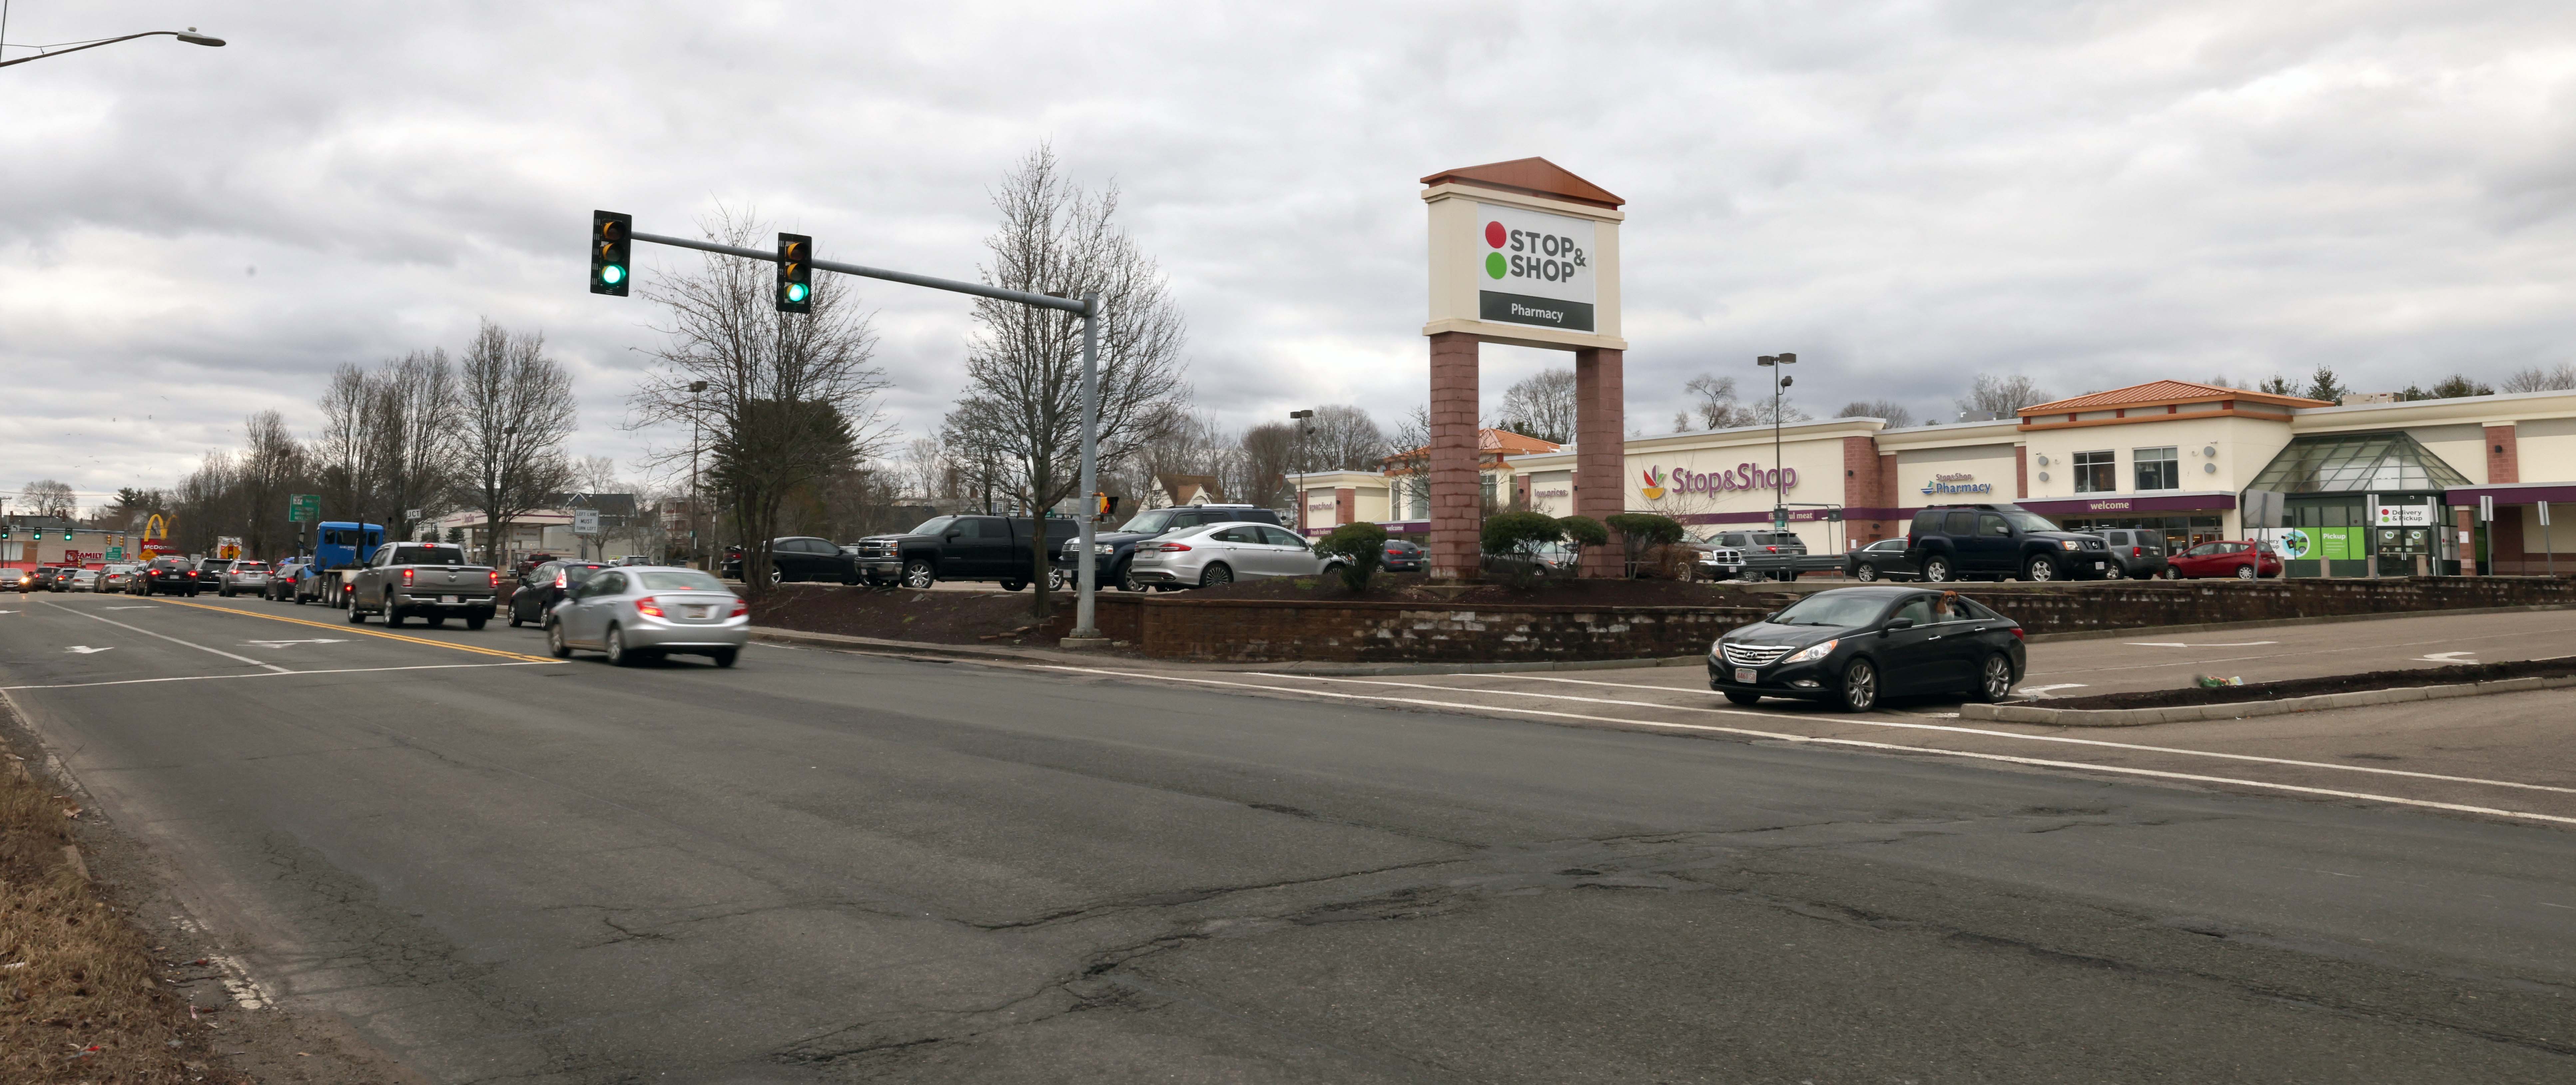 'It stinks': Brocktonians react to whiplash of Stop & Shop closing after it had been saved